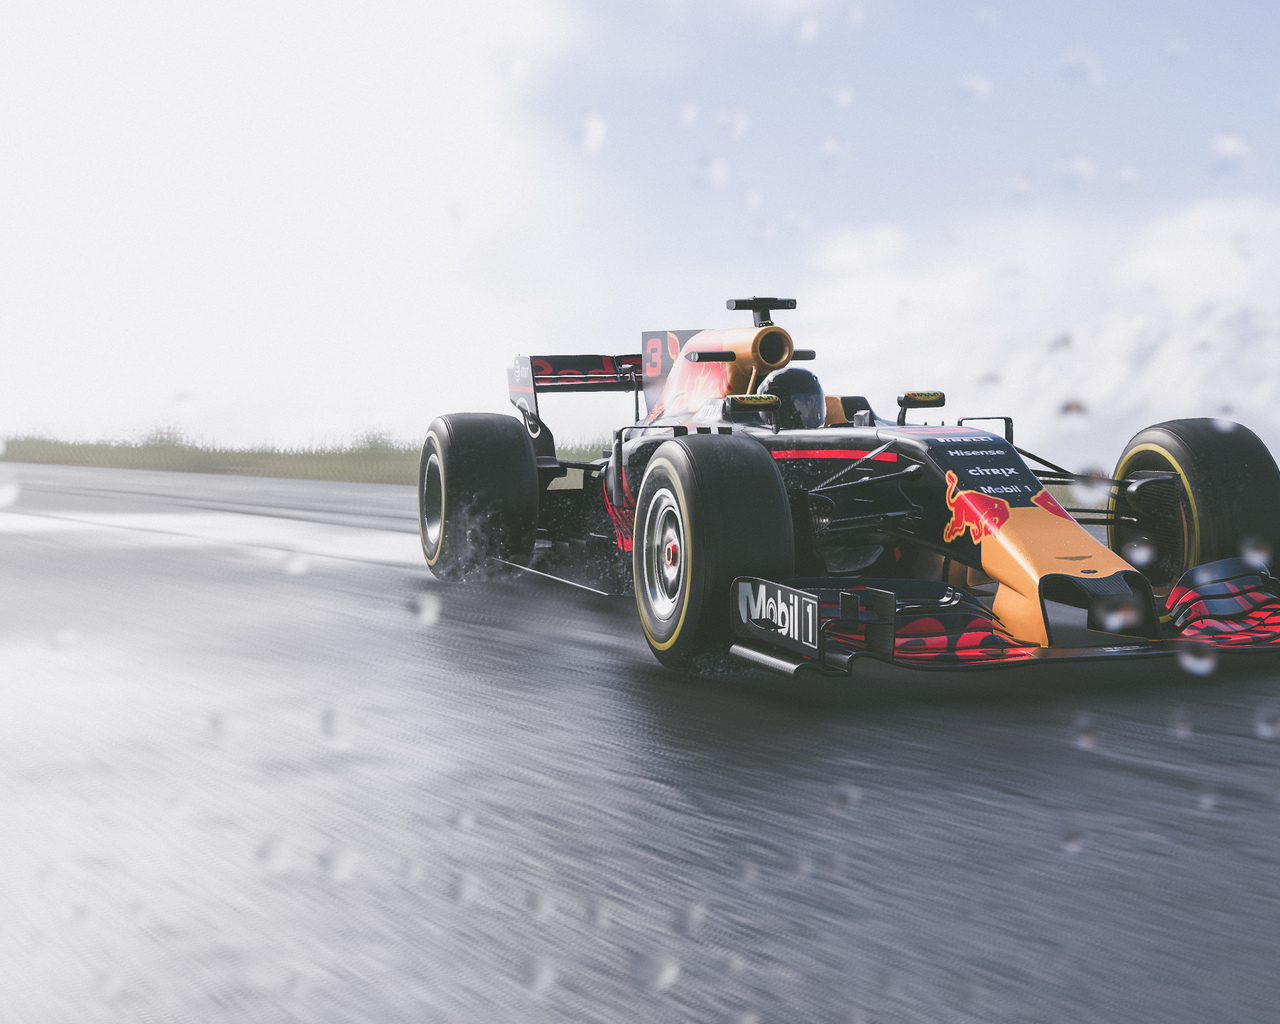 1280x1024 The Crew 2 Red Bull F1 Car 4k 1280x1024 Resolution Hd 4k Wallpapers Images Backgrounds Photos And Pictures